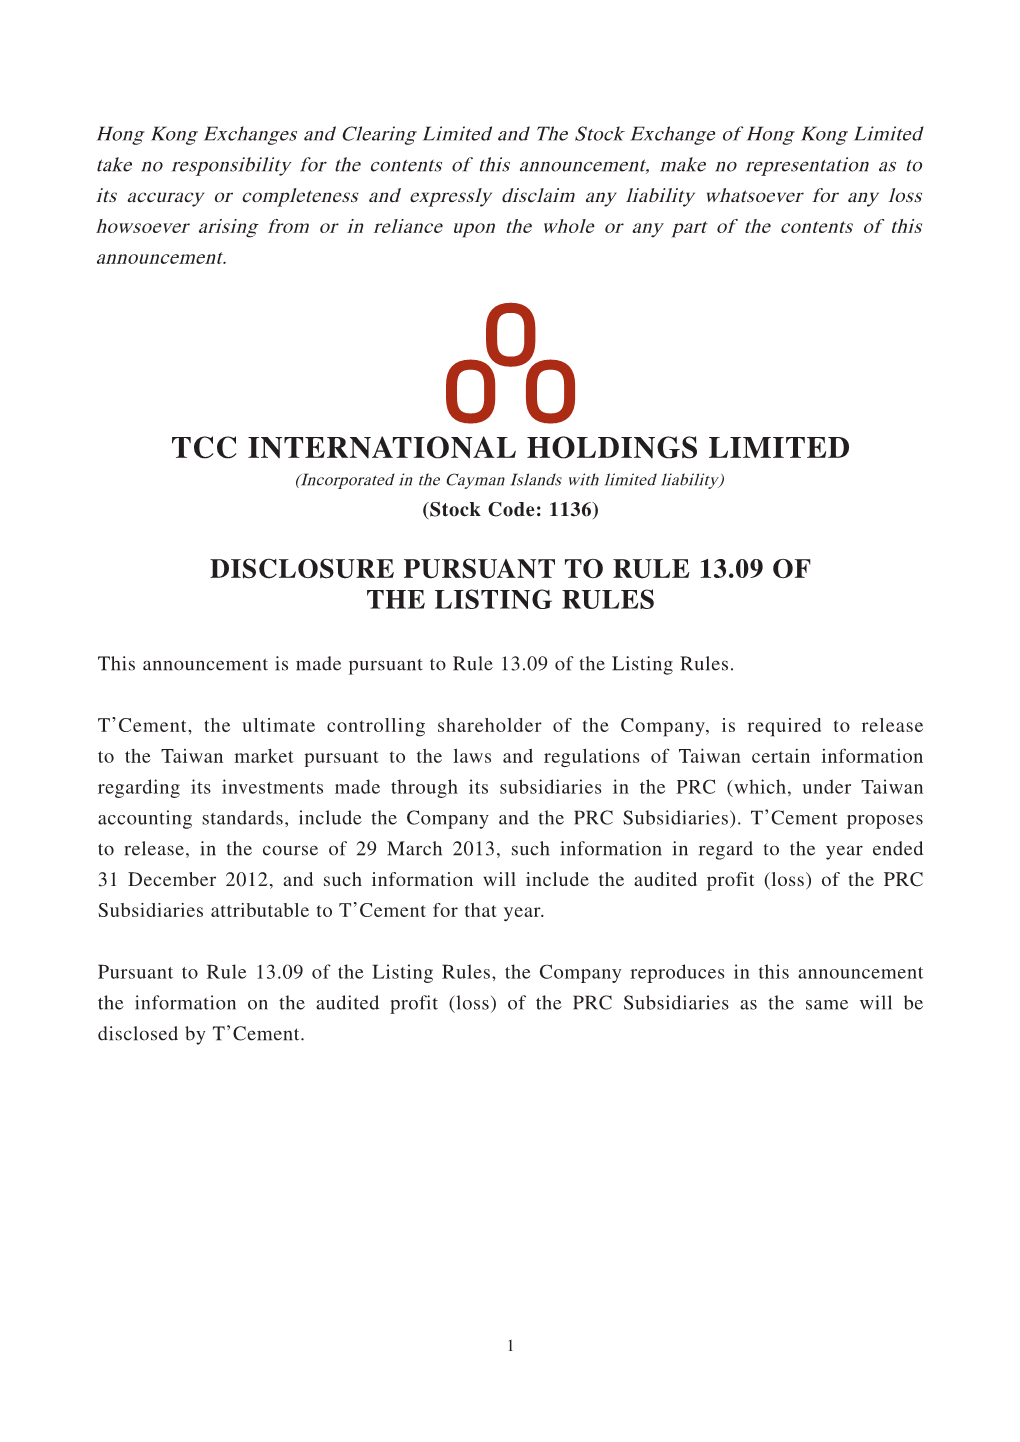 TCC INTERNATIONAL HOLDINGS LIMITED (Incorporated in the Cayman Islands with Limited Liability) (Stock Code: 1136)